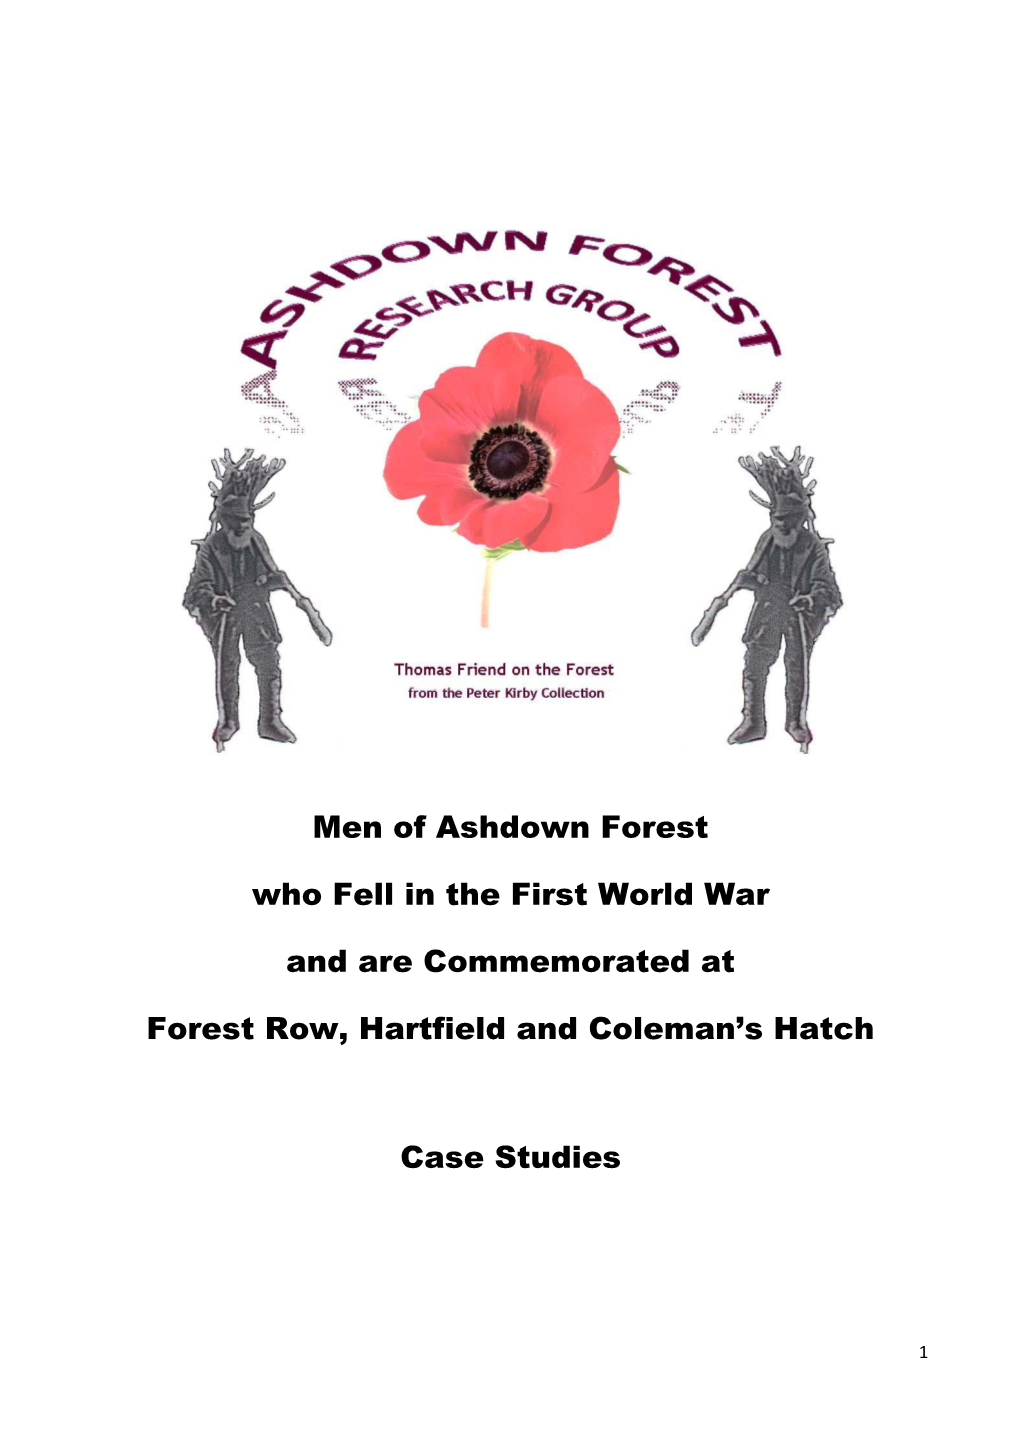 Men of Ashdown Forest Who Fell in the First World War and Are